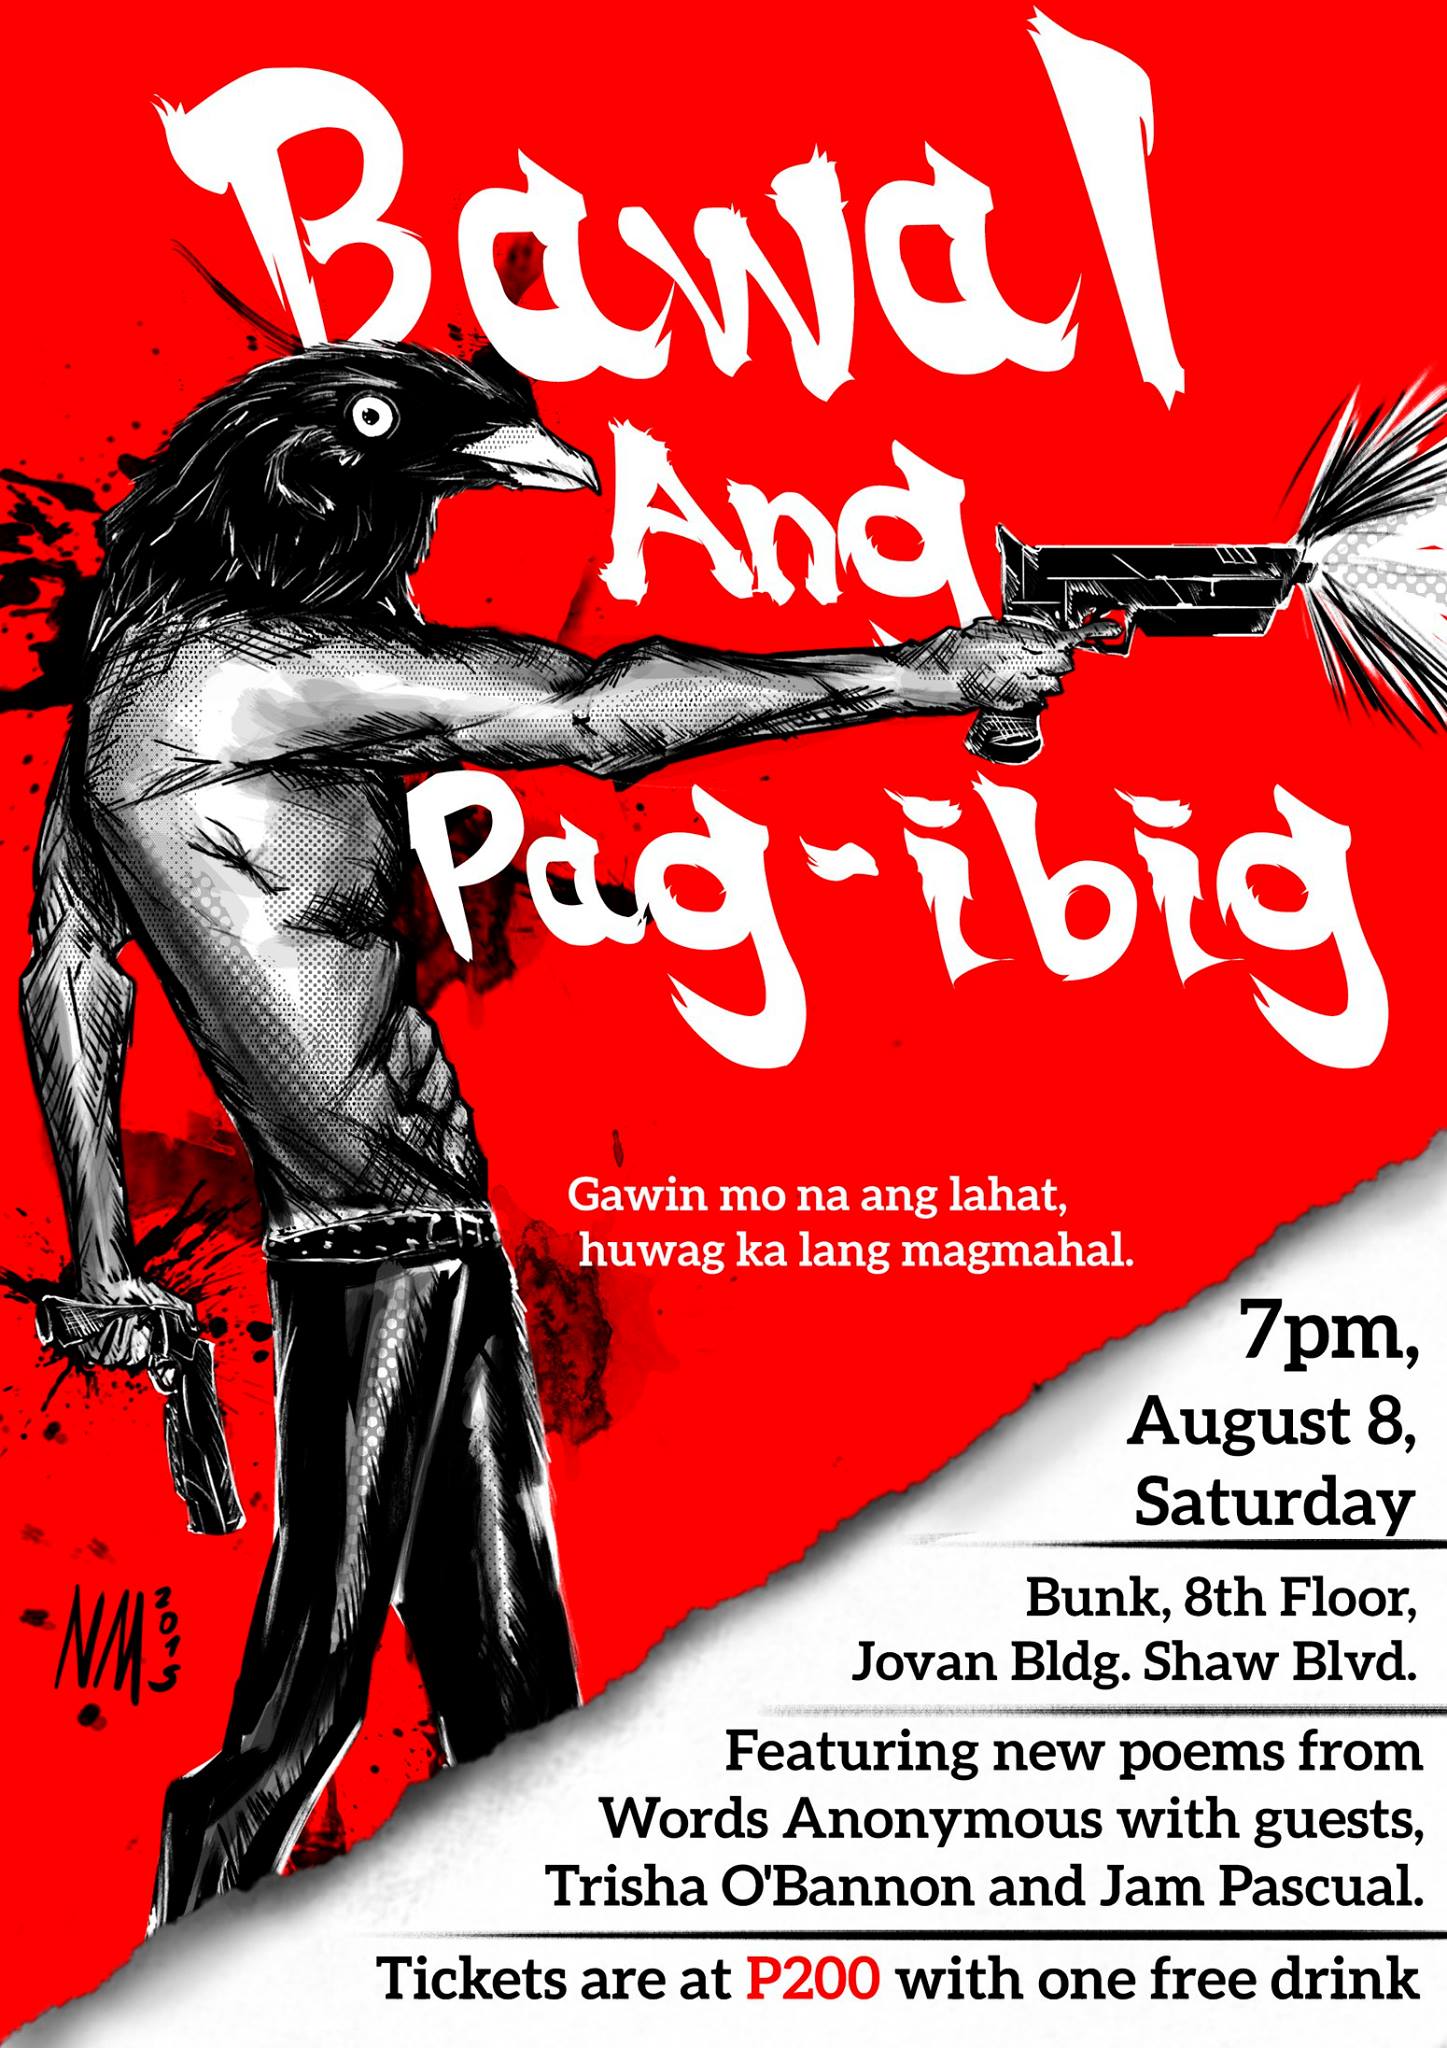 Bawal ang Pag-ibig    Saturday, August 8     at 7:00pm     4 days from now · 86°F / 76°F Thunderstorm     	     Show Map     Bunk     Jovan bldg Rooftop, Shaw blvd corner Samat st, Mandaluyong, Philippines Gawin mo na ang lahat, huwag na huwag ka lang magmamahal. Words Anonymous x Bunk present "BAWAL ANG PAG-IBIG" a spoken word poetry + open mic* event where no room is left for love. Featuring new poetry from Words Anonymous with guests: Trisha O'Bannon Jam Pascual Tickets are at P200 with one free drink. (*Open mic will start after the show proper.) ----- And the event's official poster is here! Many thanks to Words Anonymous' official Pub Dragon, Nico, for this bad ass chicken!